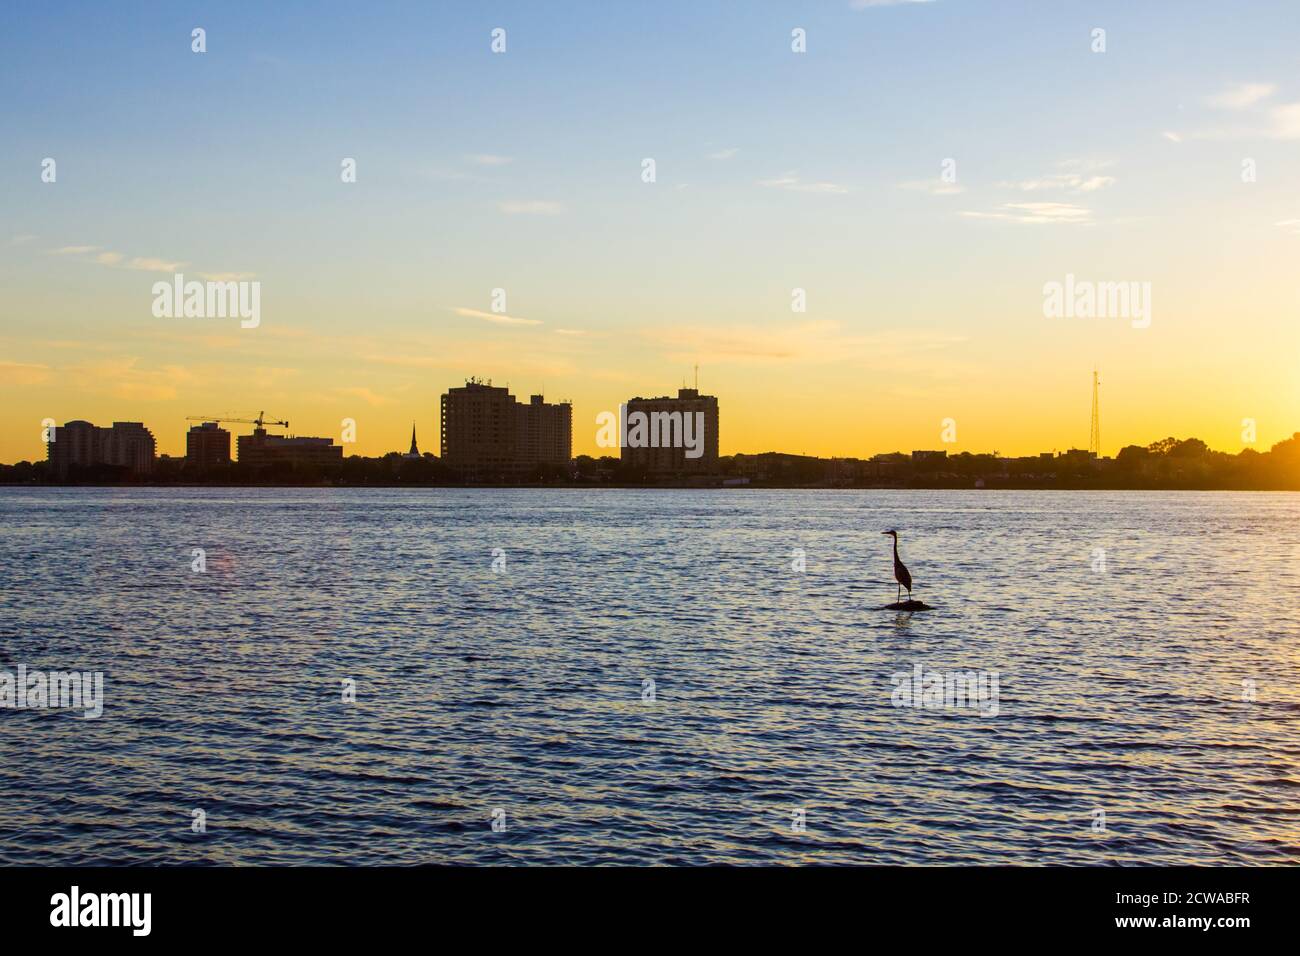 Sunrise Over Sarnia, Ontario. Beautiful sunrise over the waterfront district of Sarnia in the Canadian Province of Ontario. Stock Photo